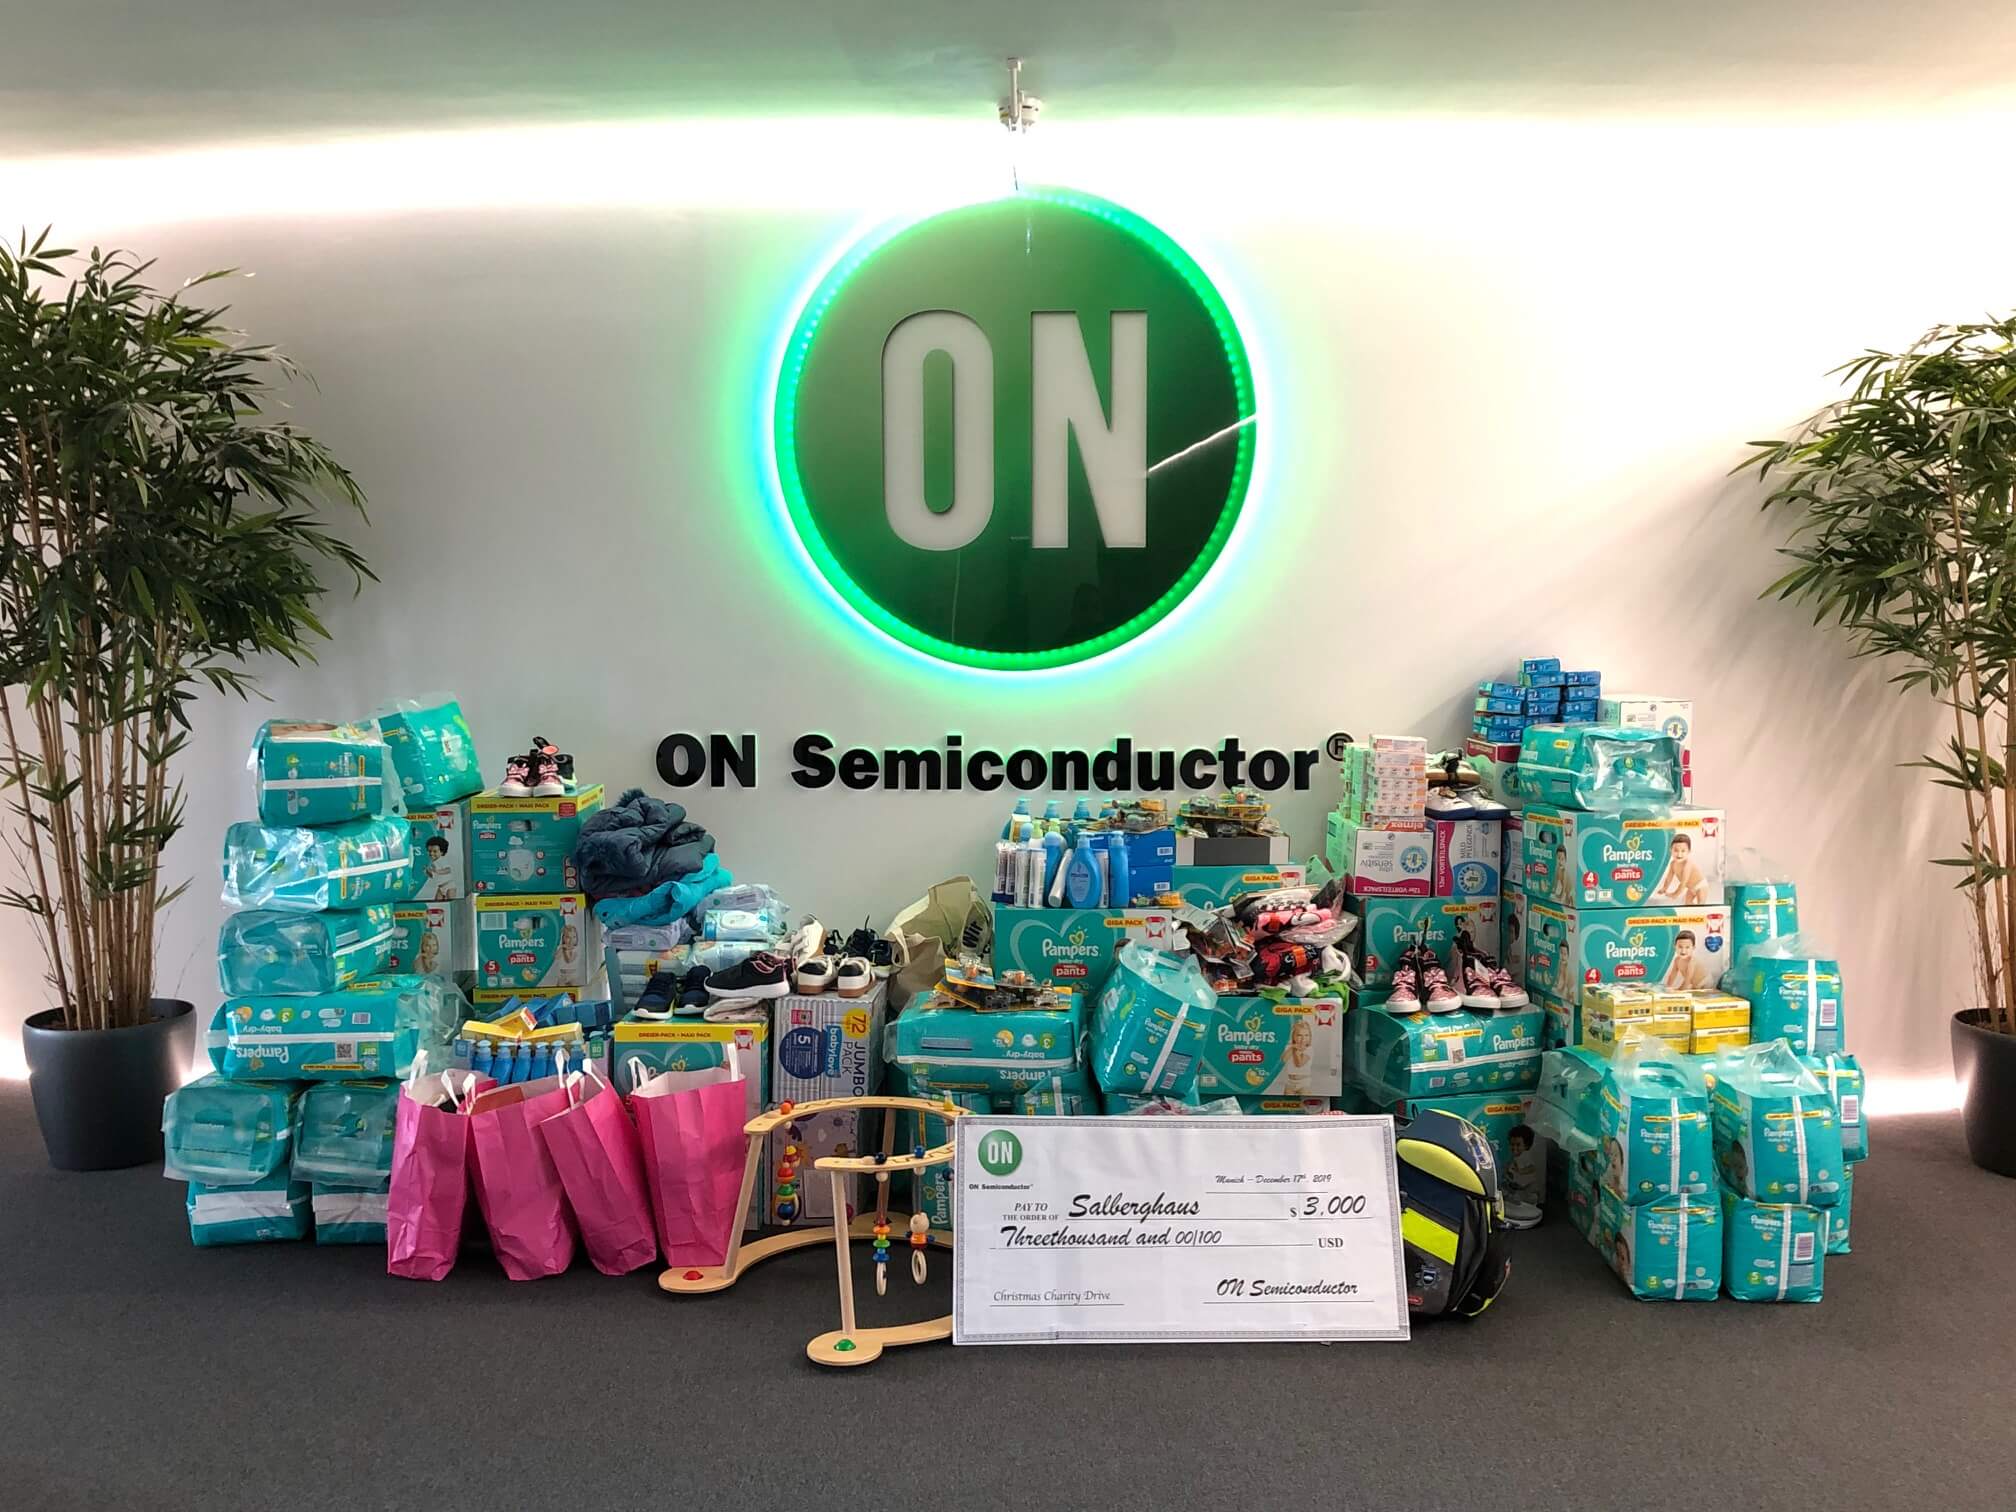 onsemi Donates $6,147 to the Salberghaus children’s home
                                       in Putzbrunn, Germany